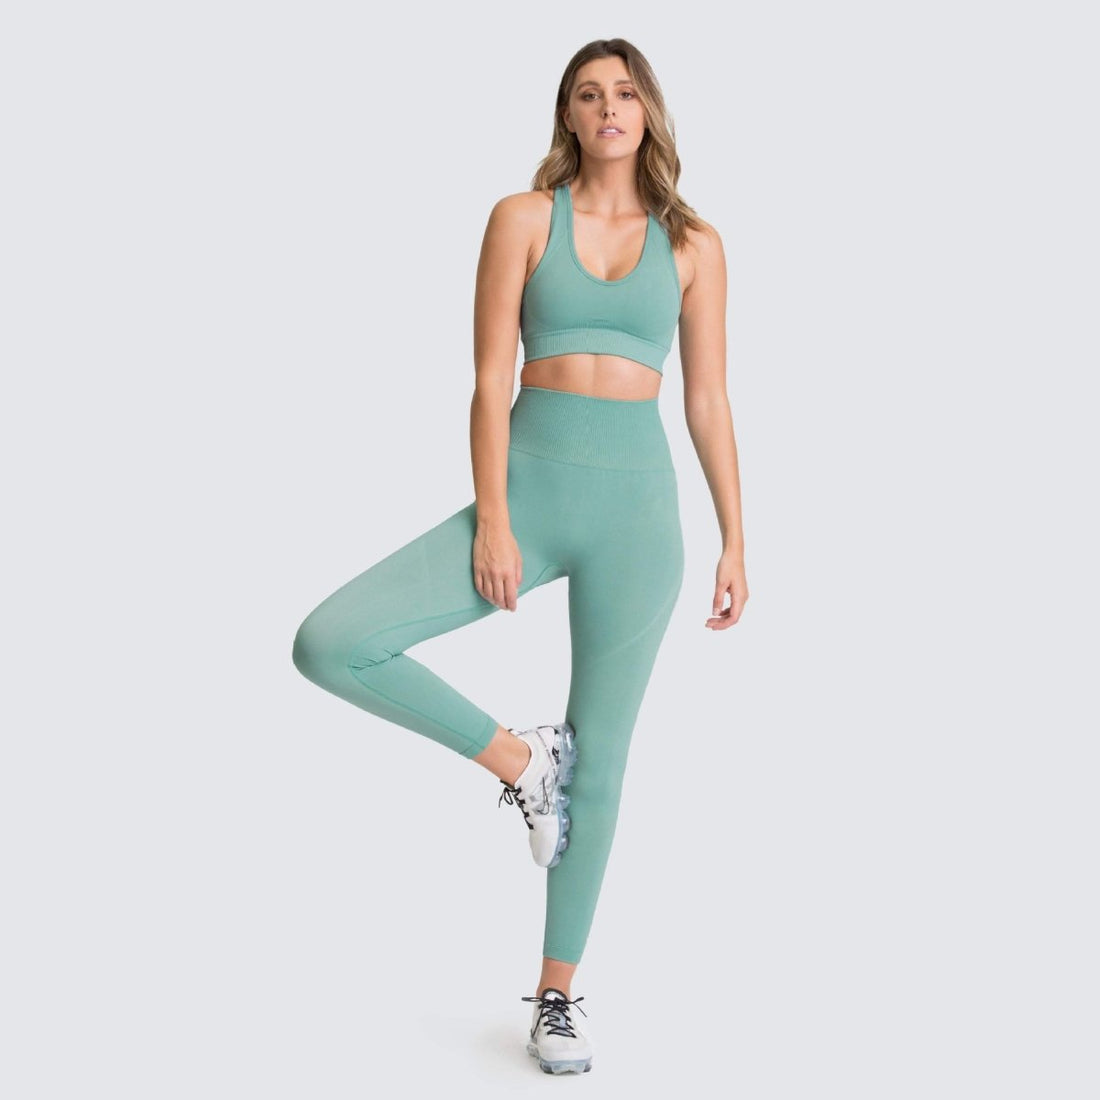 Generic Seamless Yoga Set Women Sport Set Workout Clothes For Women  Sportswear Outfit Gym Clothing Suit Conjunto Deportivo Mujer(#2pcsgreen)